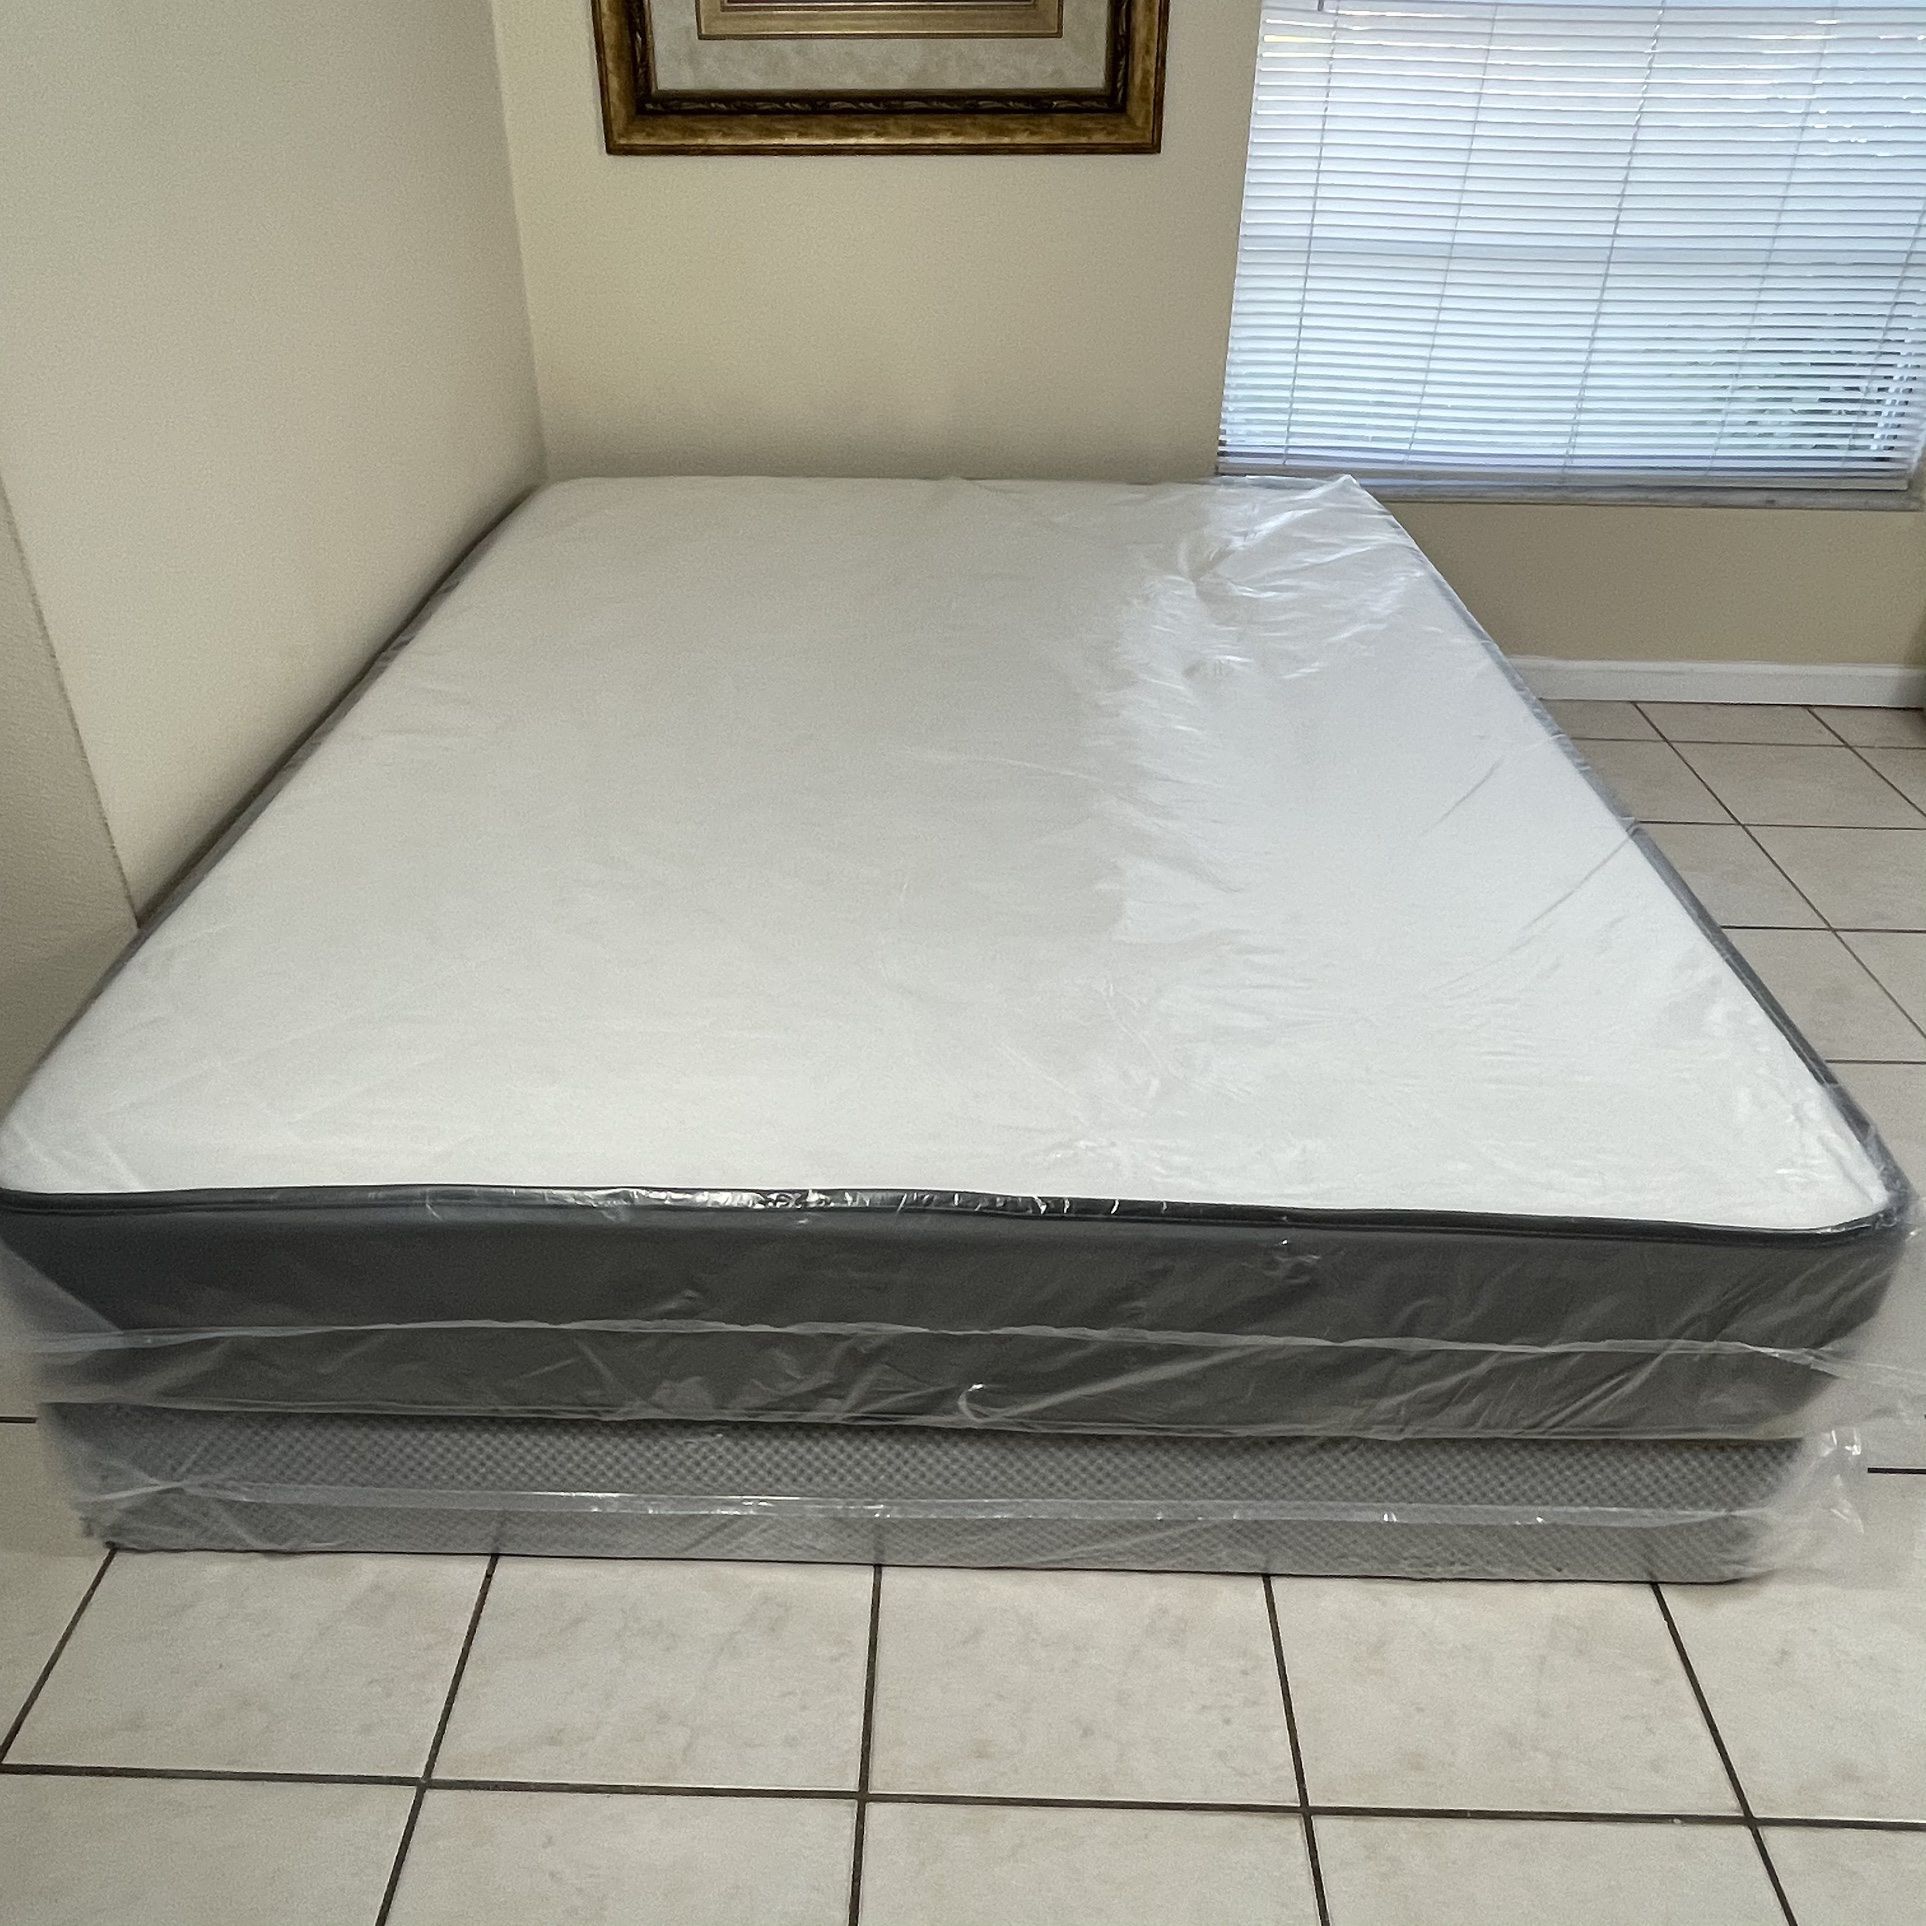 New Full Mattress And boxspring Set! FREE SAME DAY DELIVERY 